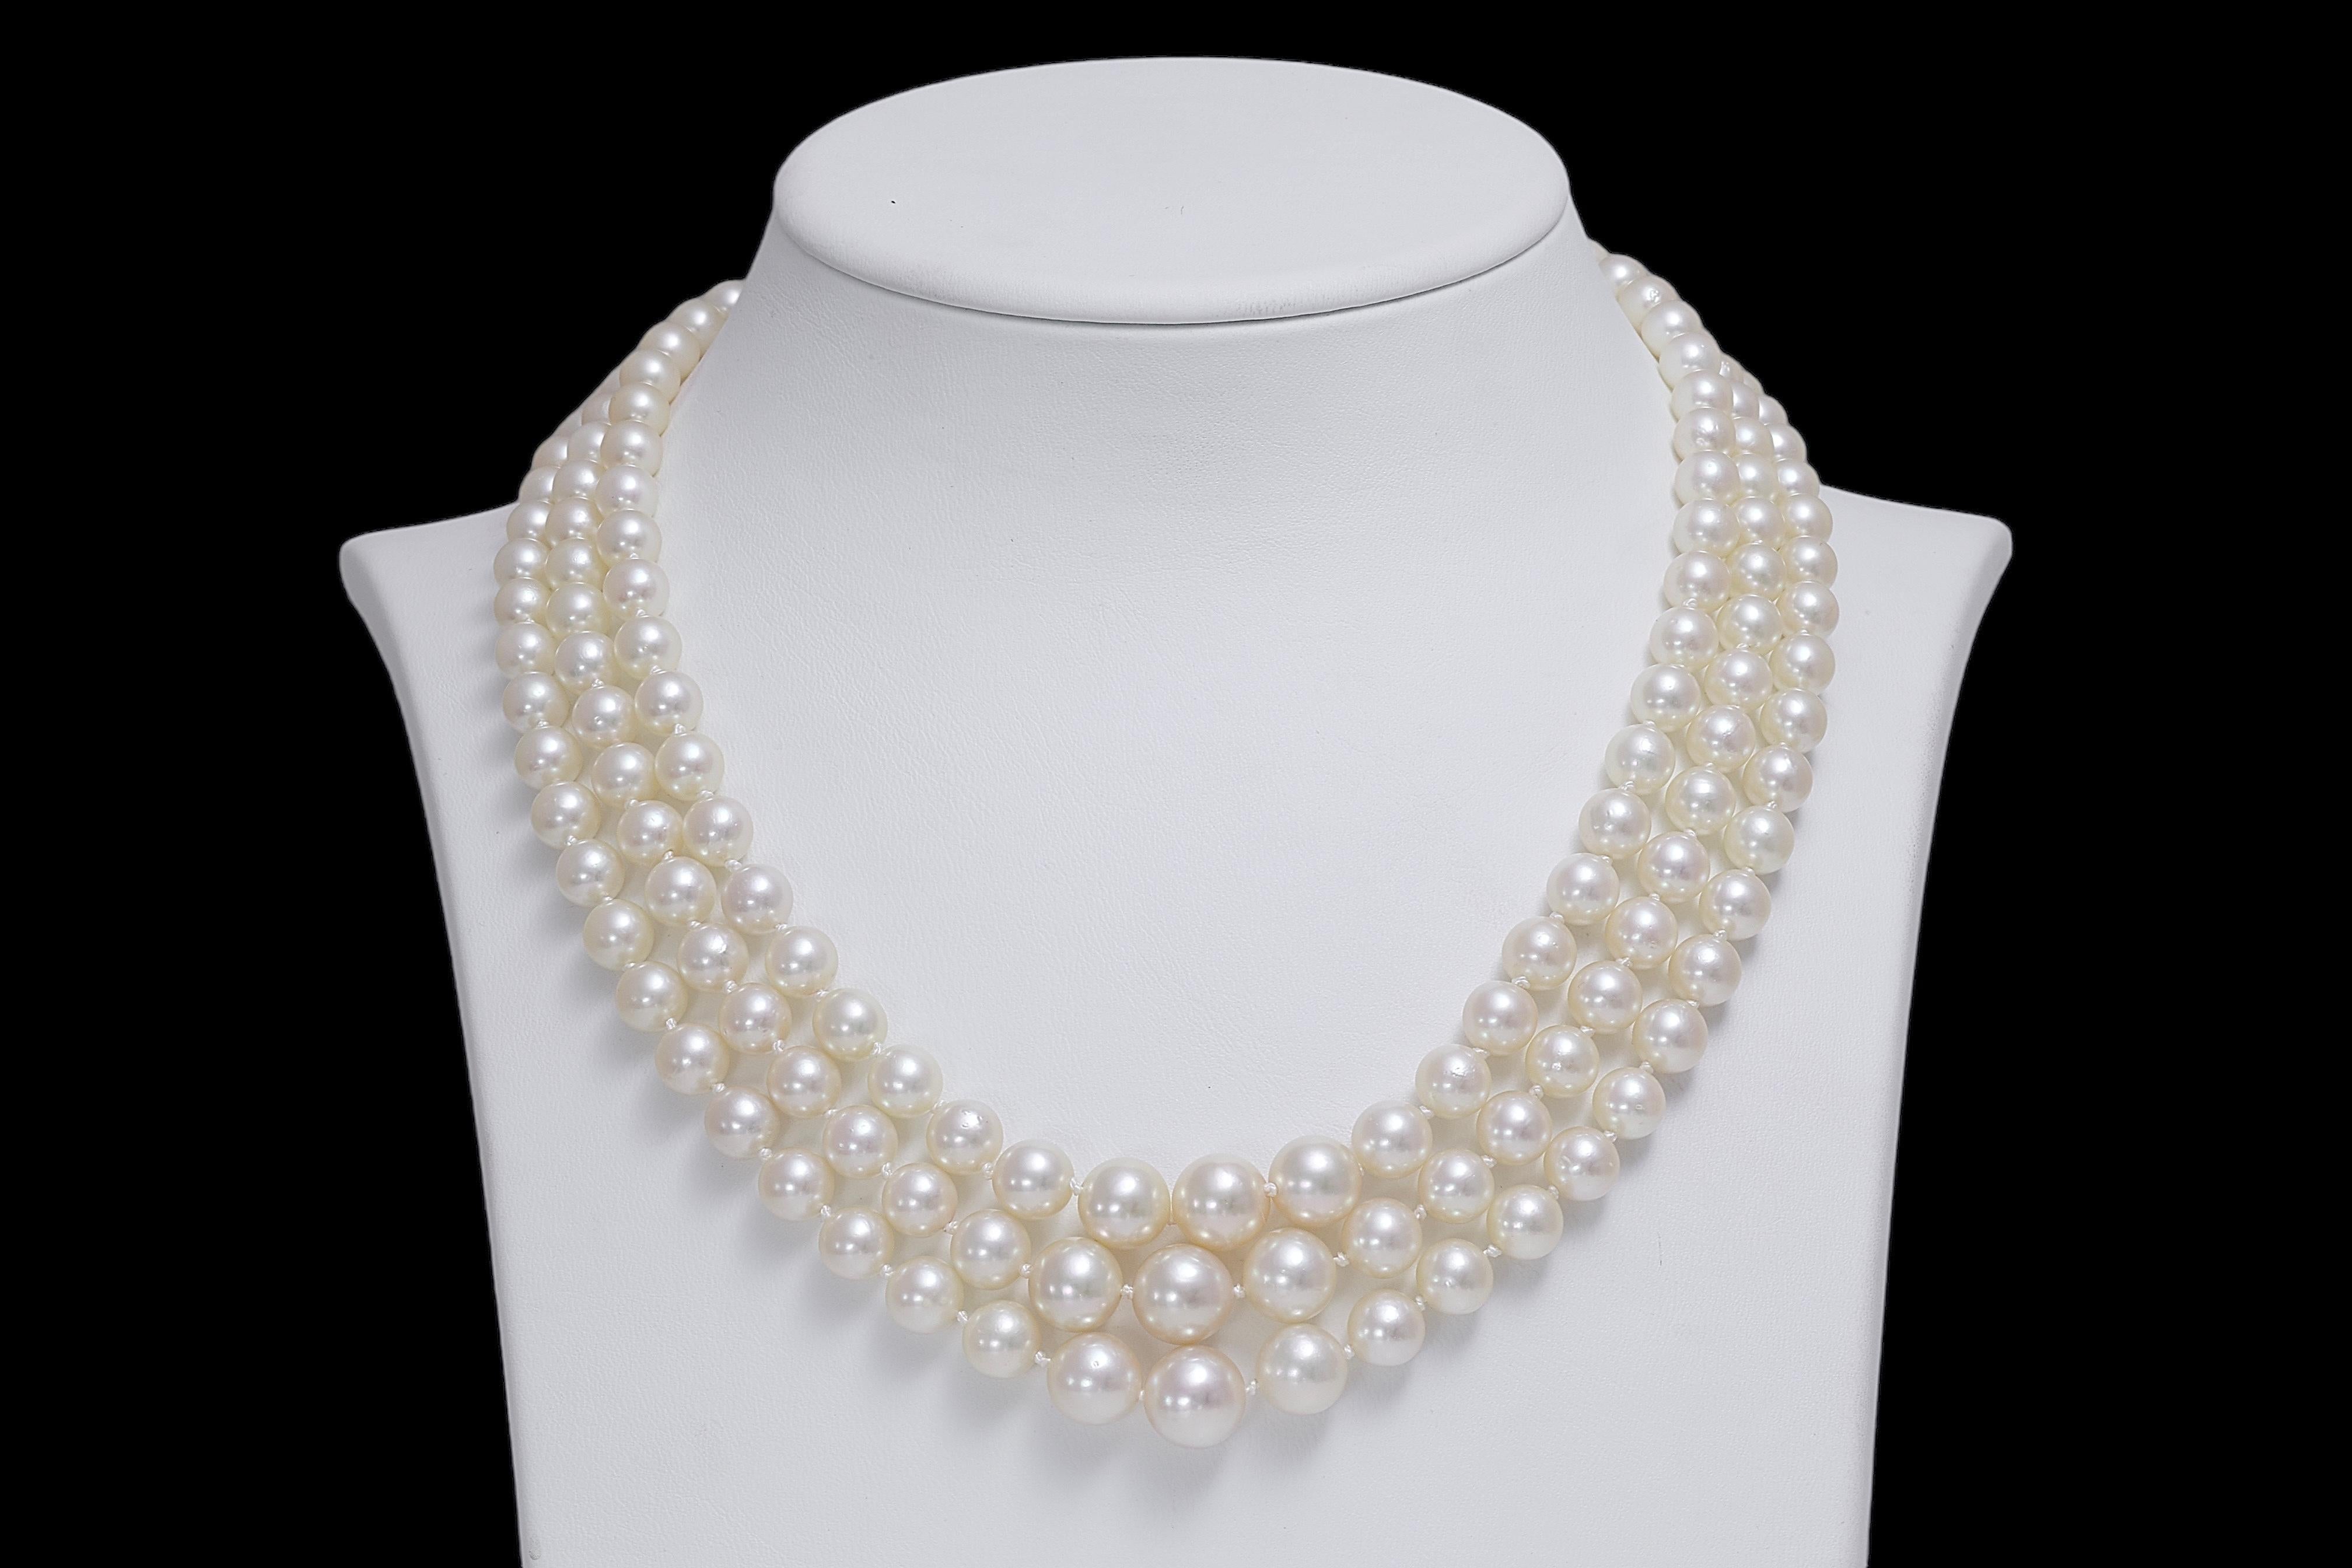 18 kt. White Gold Akoya Degradé Pearls and Diamonds 3 Strand Necklace For Sale 2